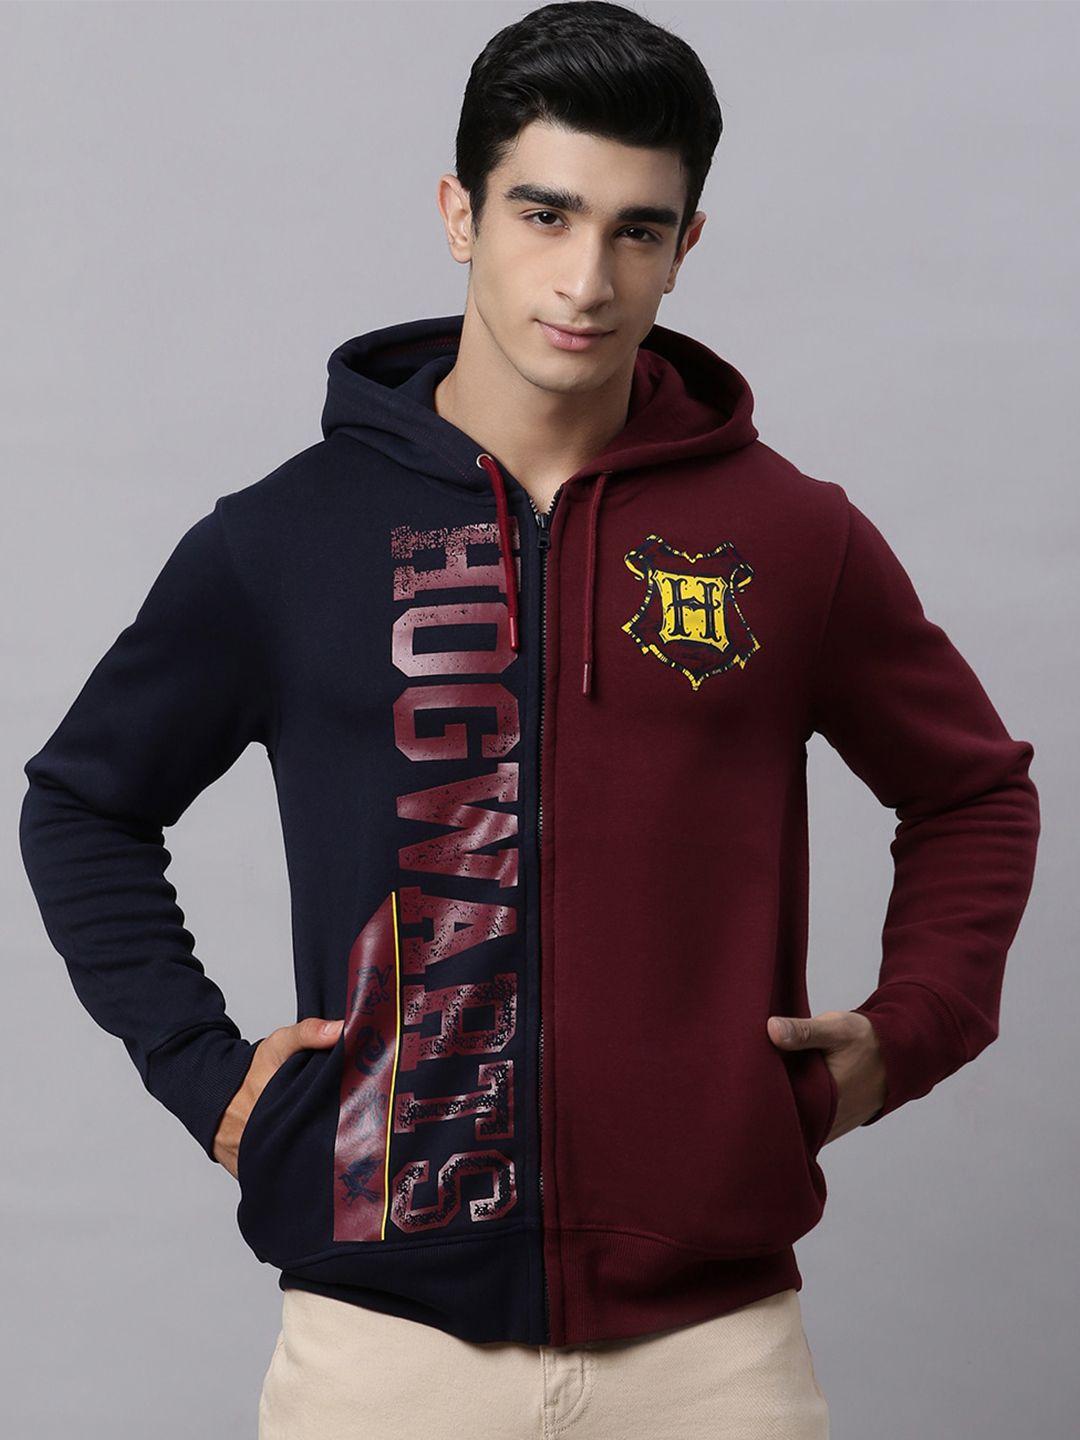 free authority harry potter printed hoodie